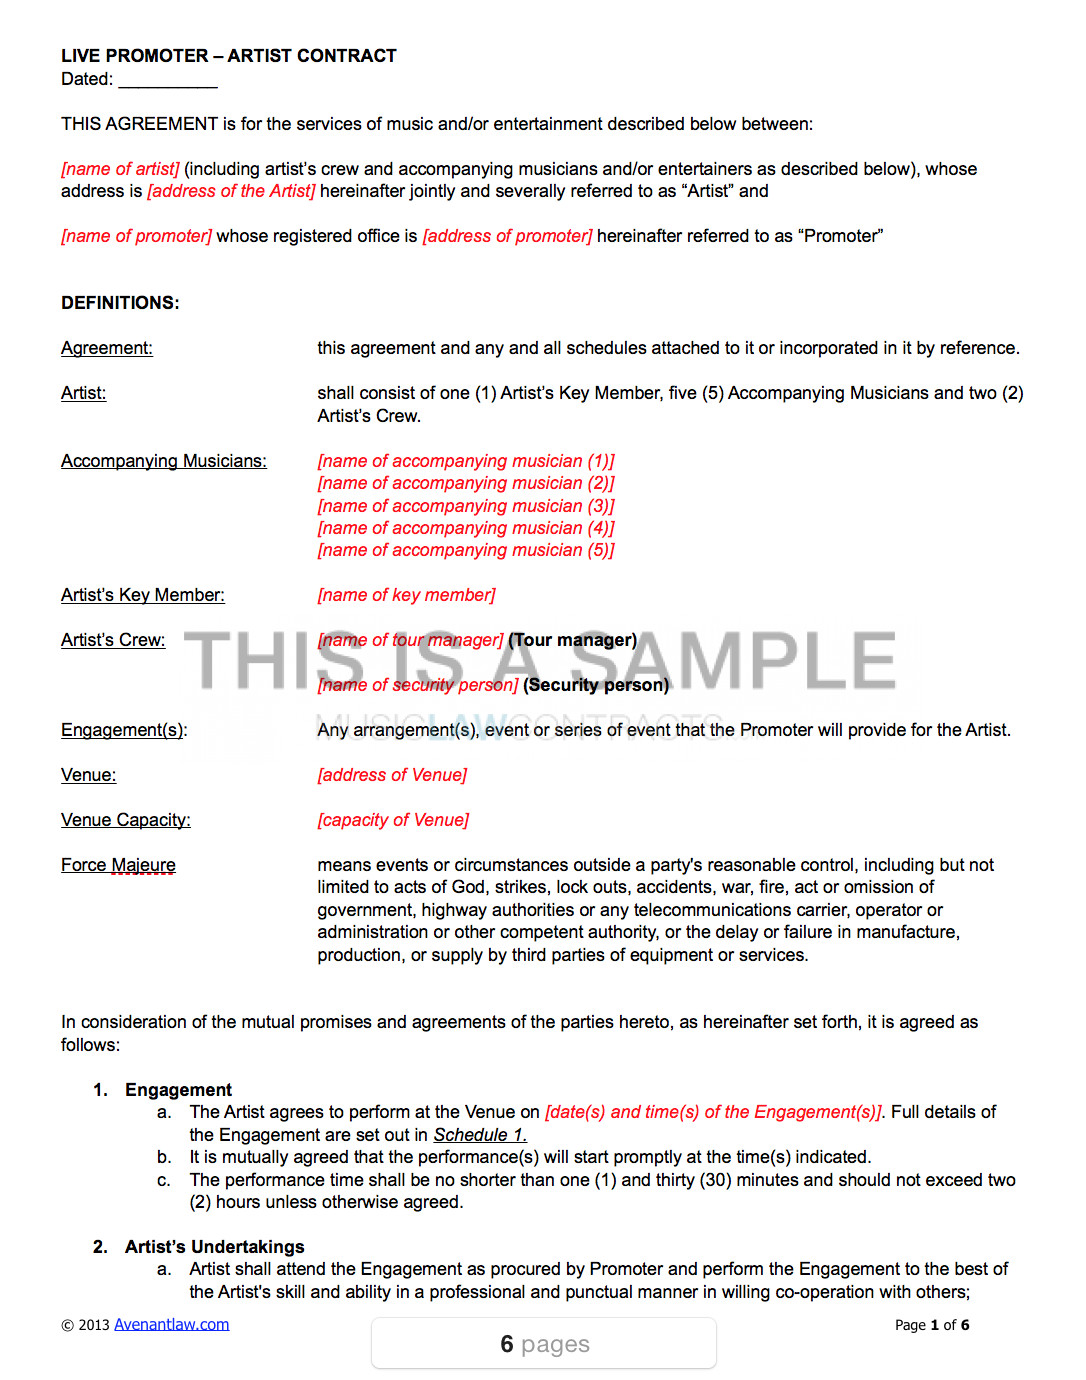 live promoter artist contract